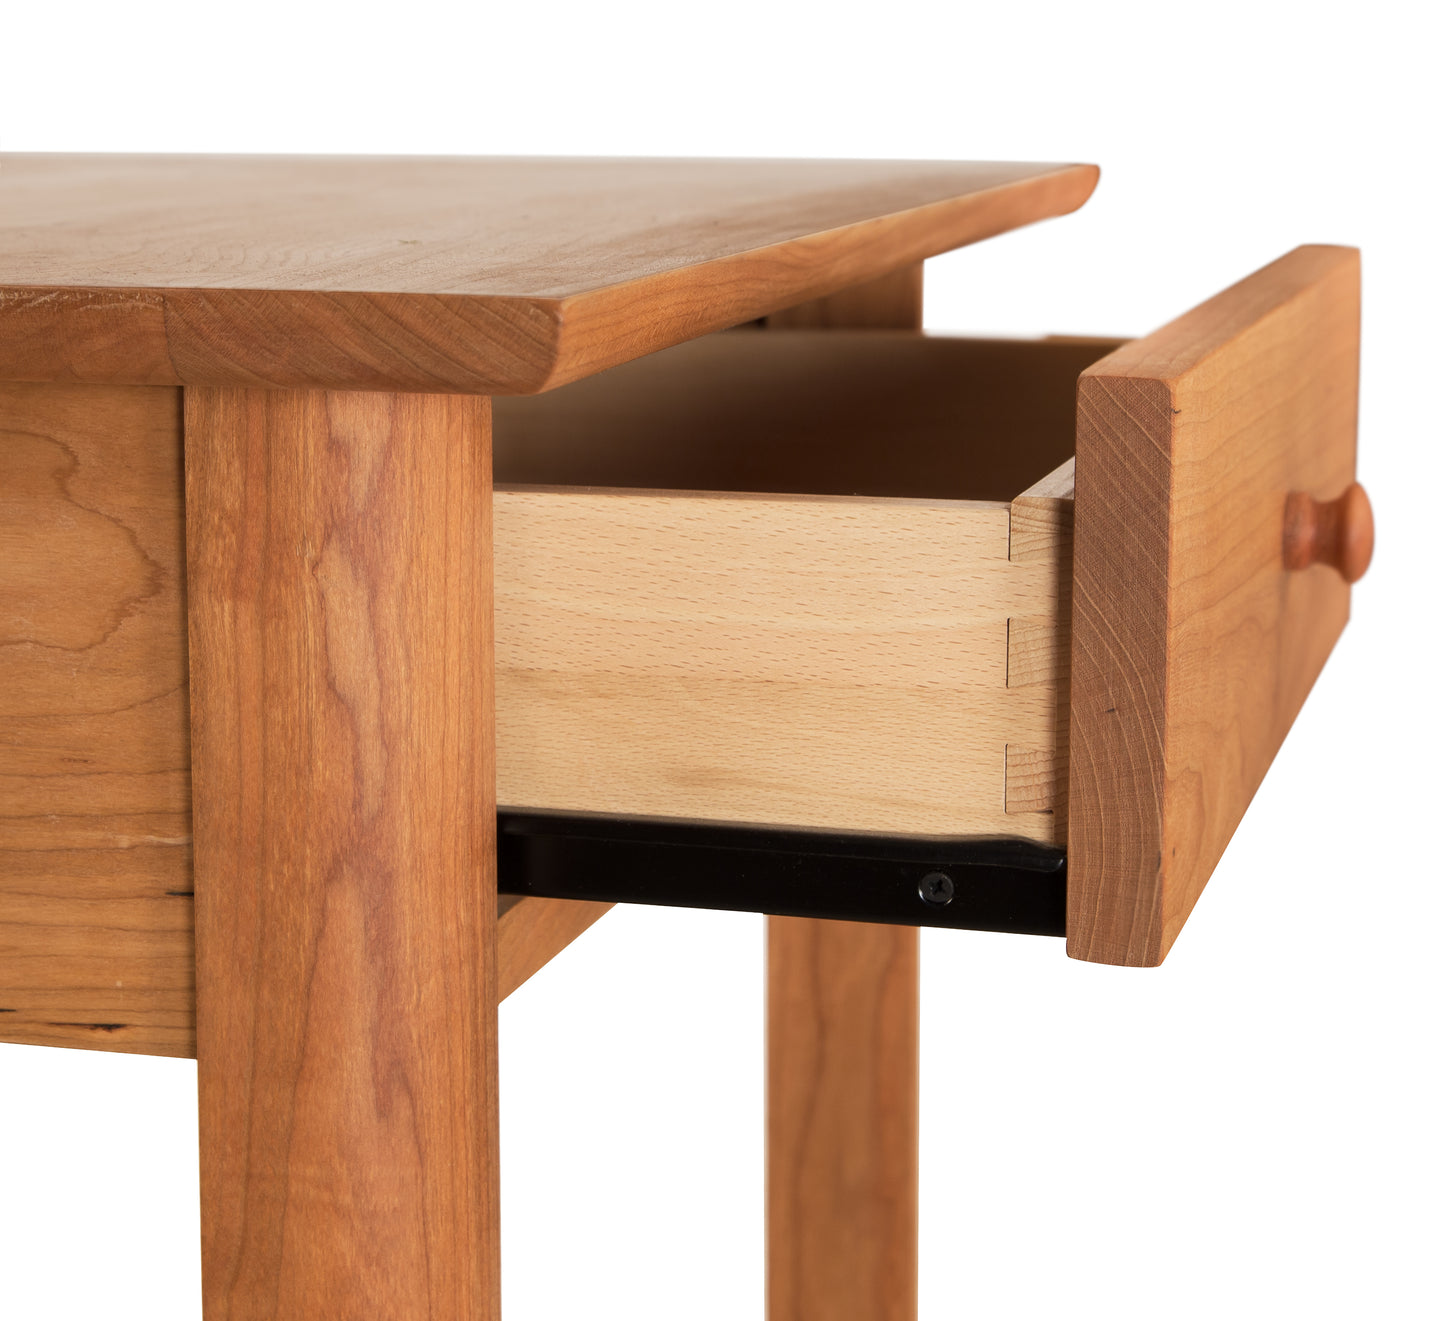 A wooden table with a drawer.